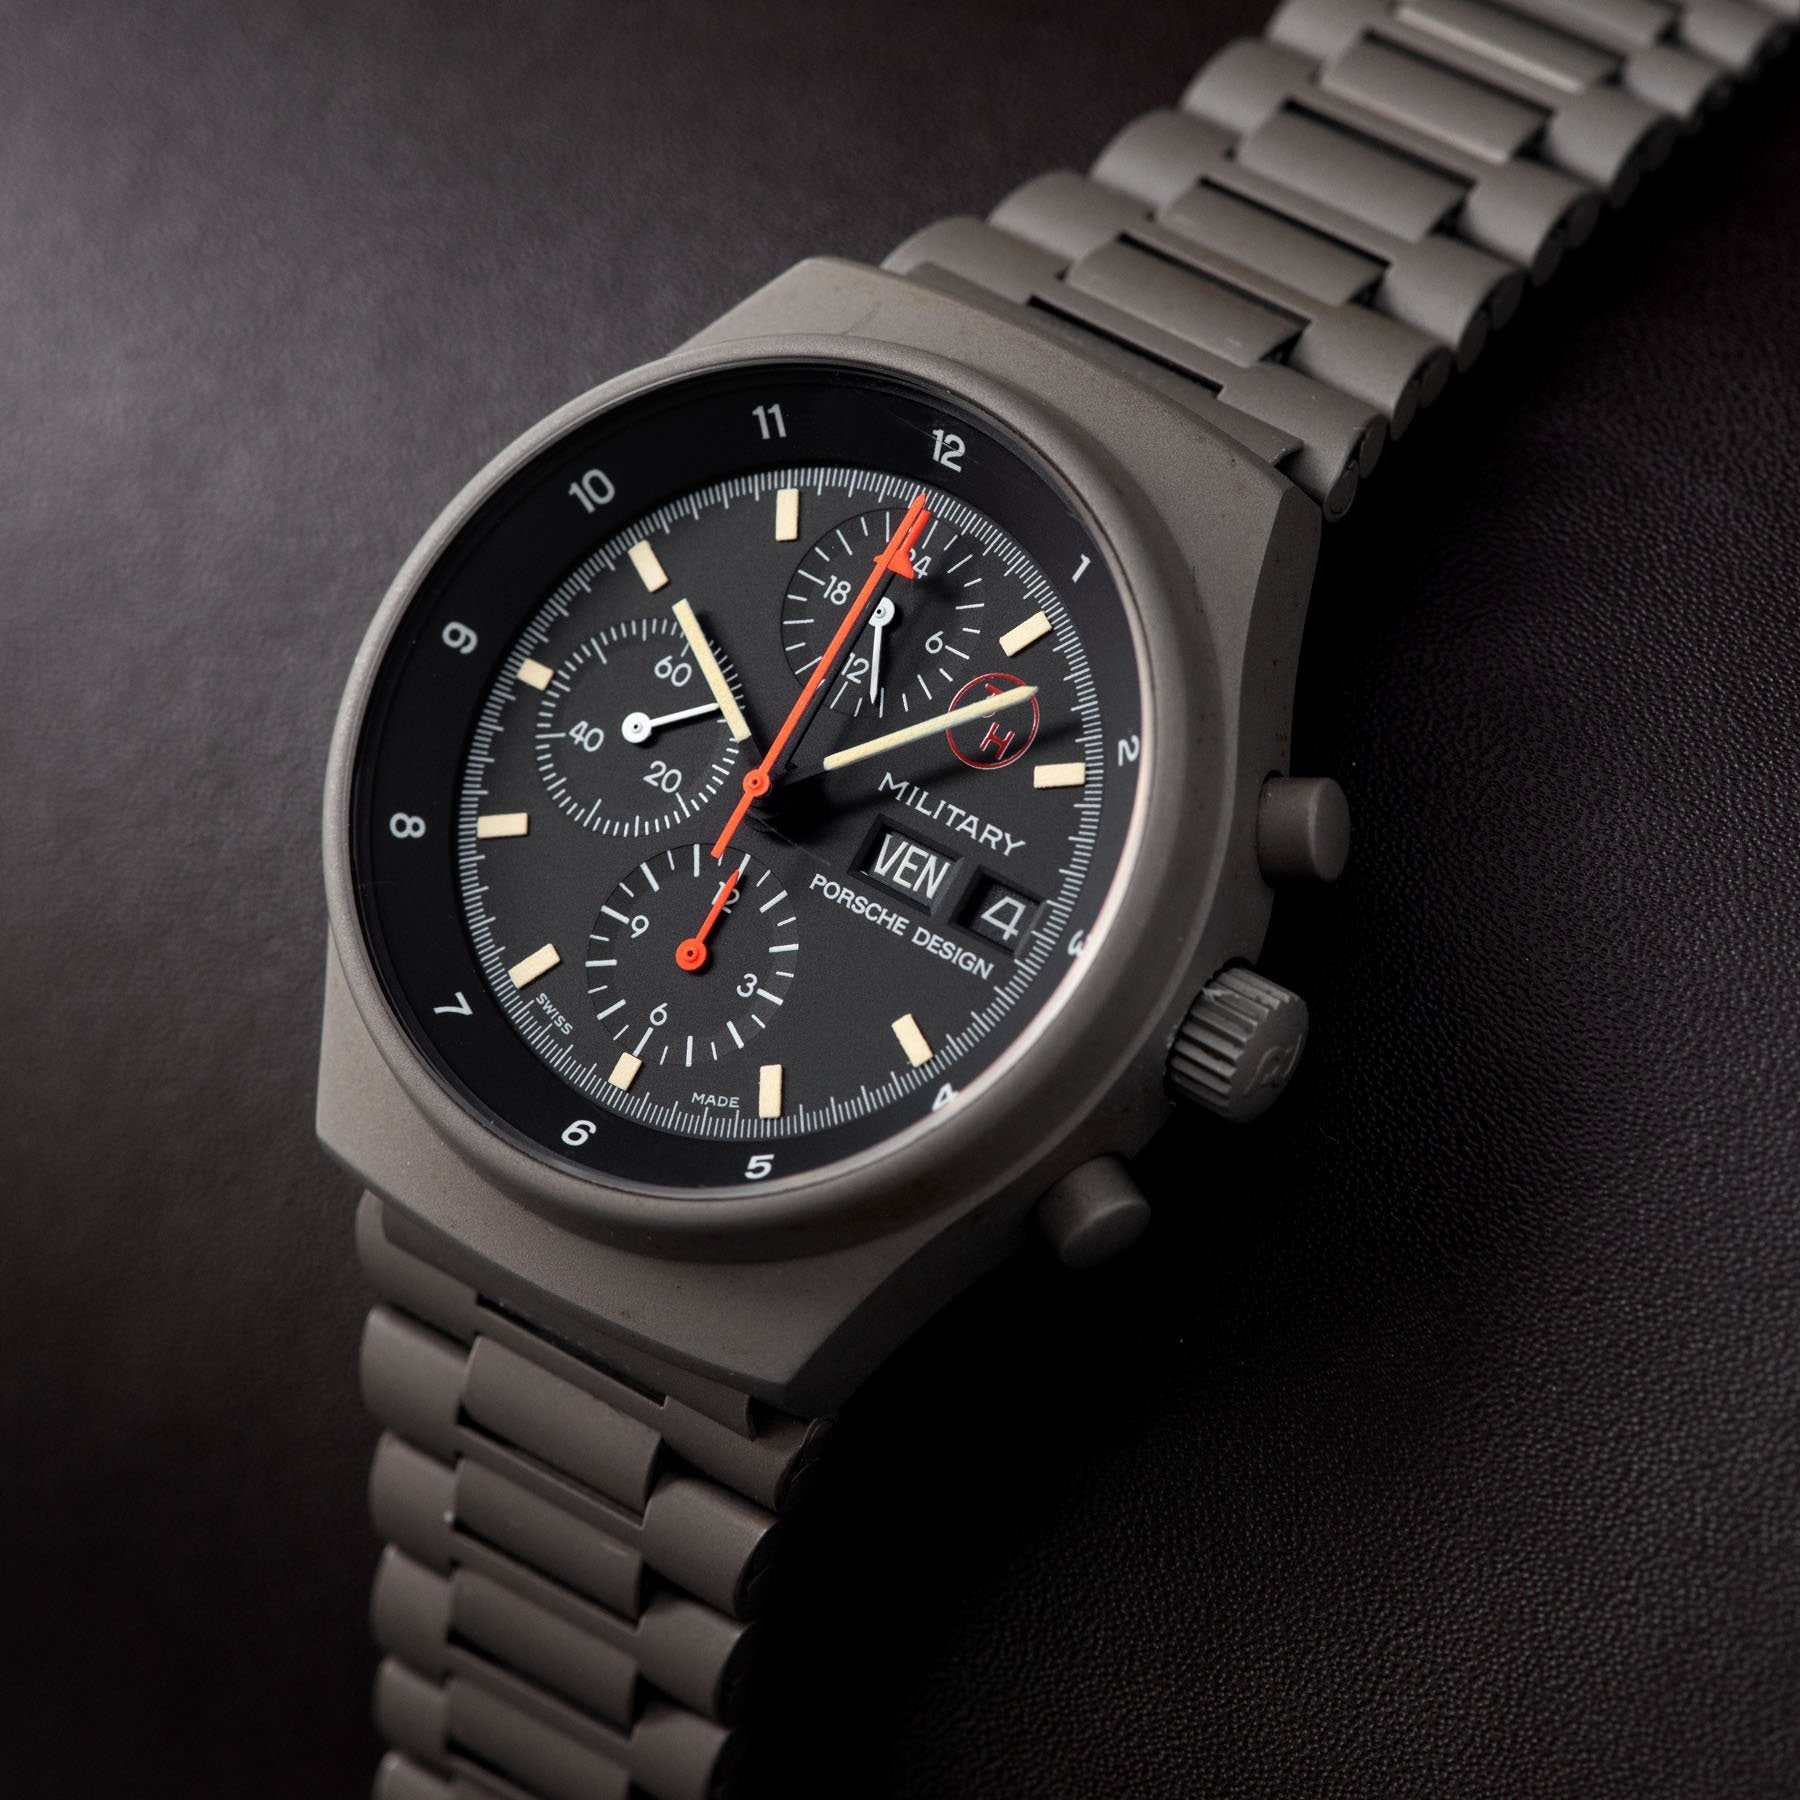 Porsche Design by Orfina 'Military' Chronograph Reference 7177